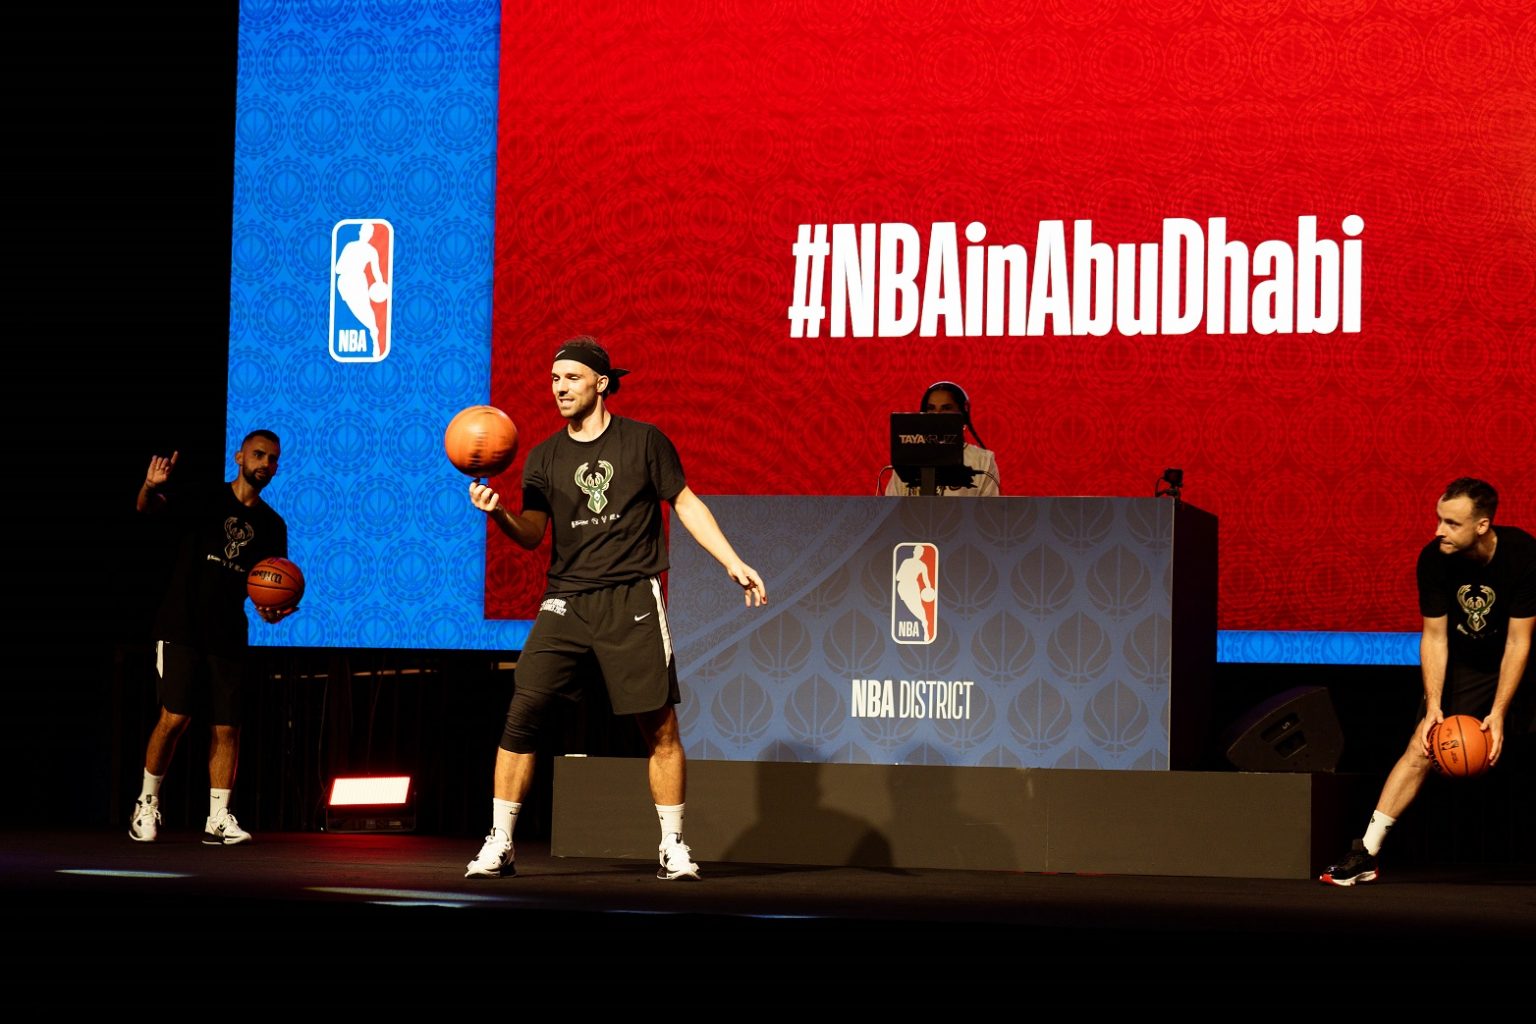 Abu Dhabi turns out in force for opening of the immersive NBA District